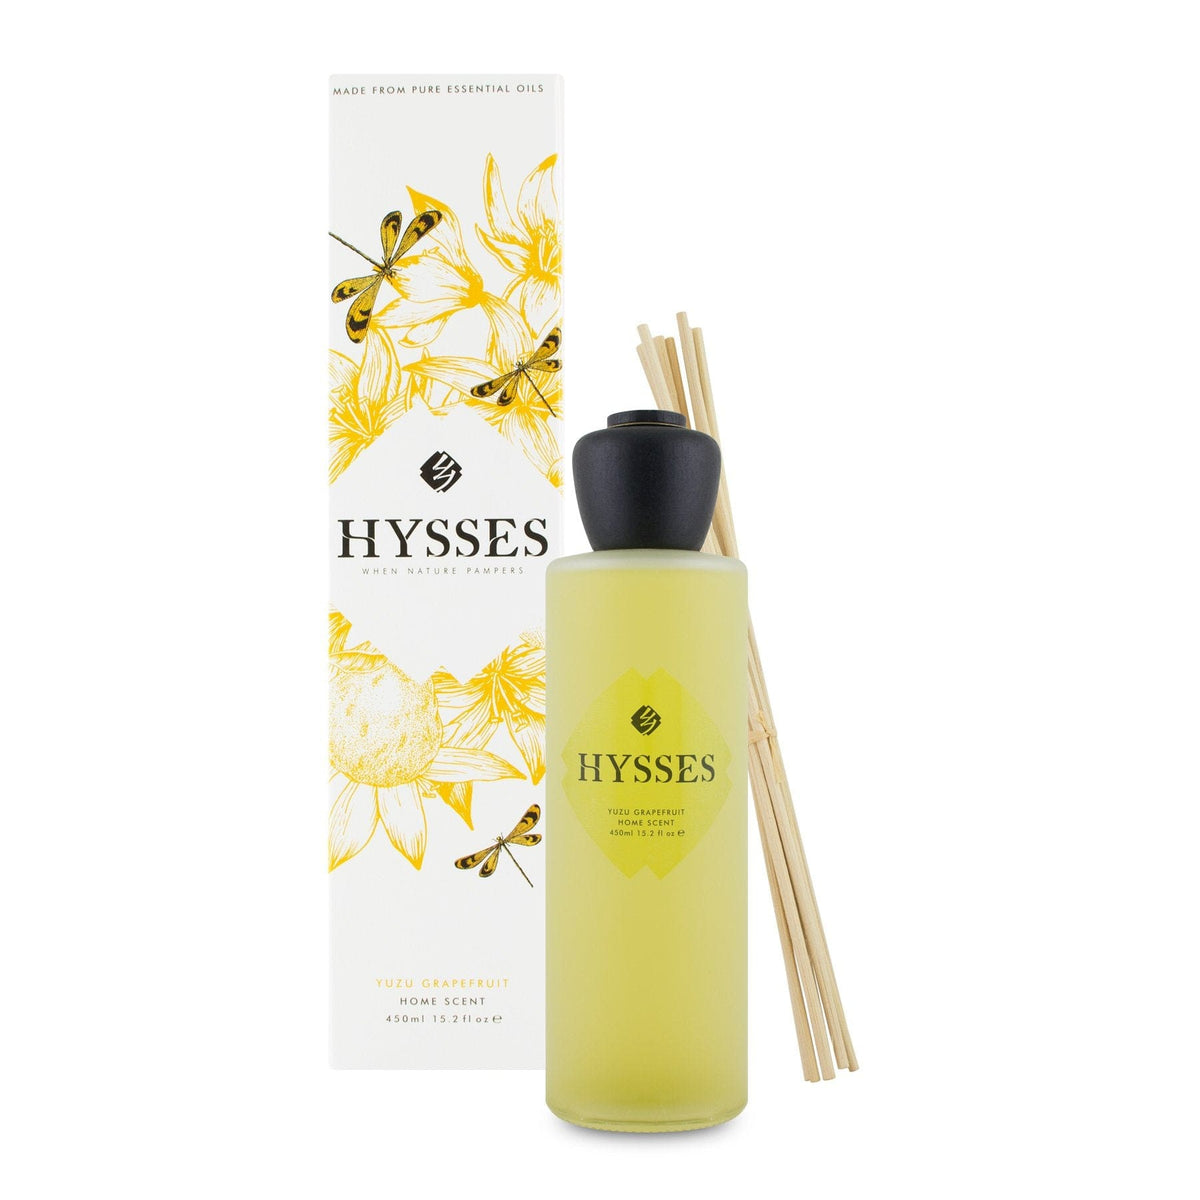 Hysses Home Scents 450ml Home Scent Reed Diffuser Yuzu Grapefruit